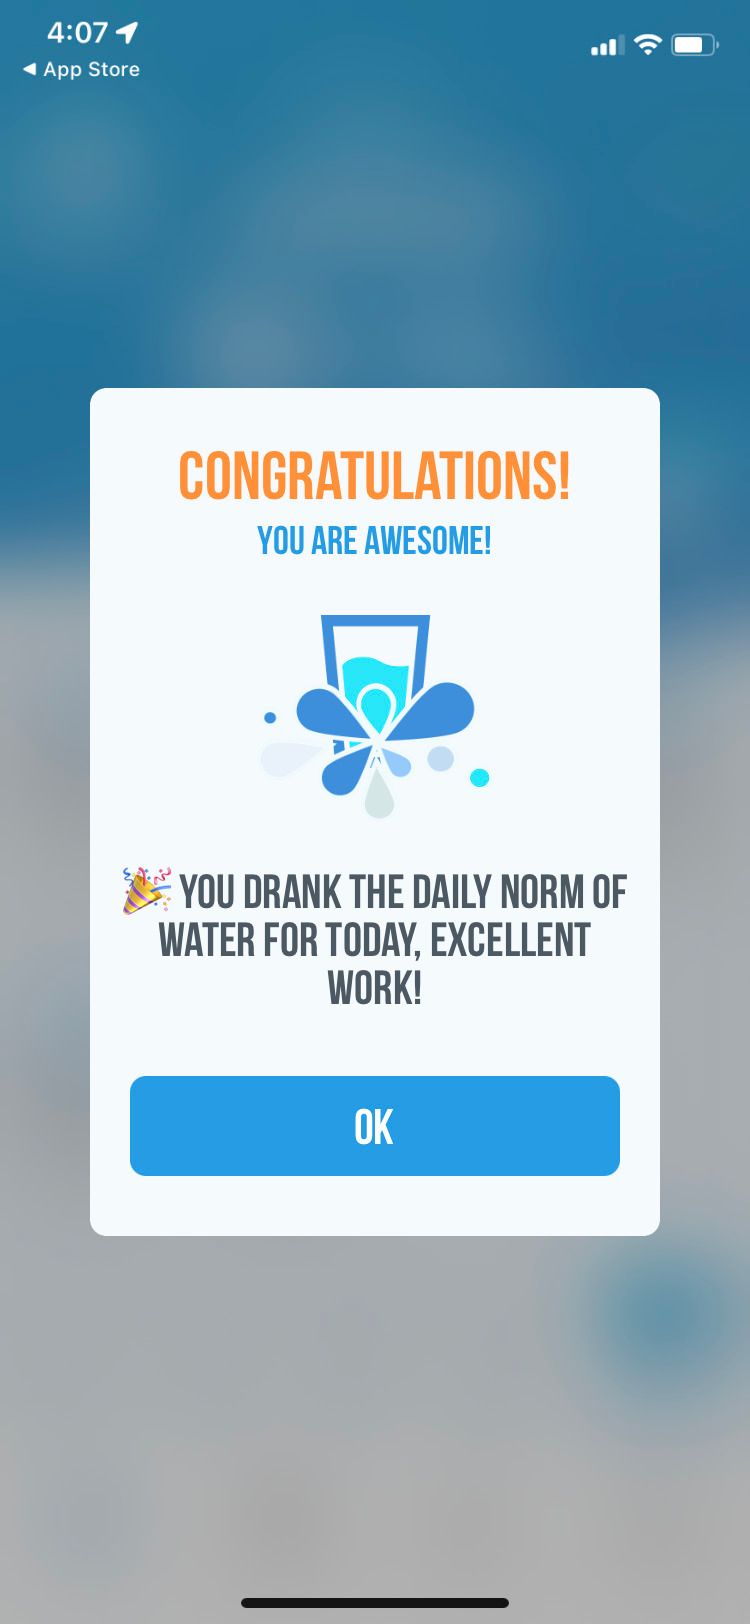 Water Reminder - Daily Tracker congraulations screen